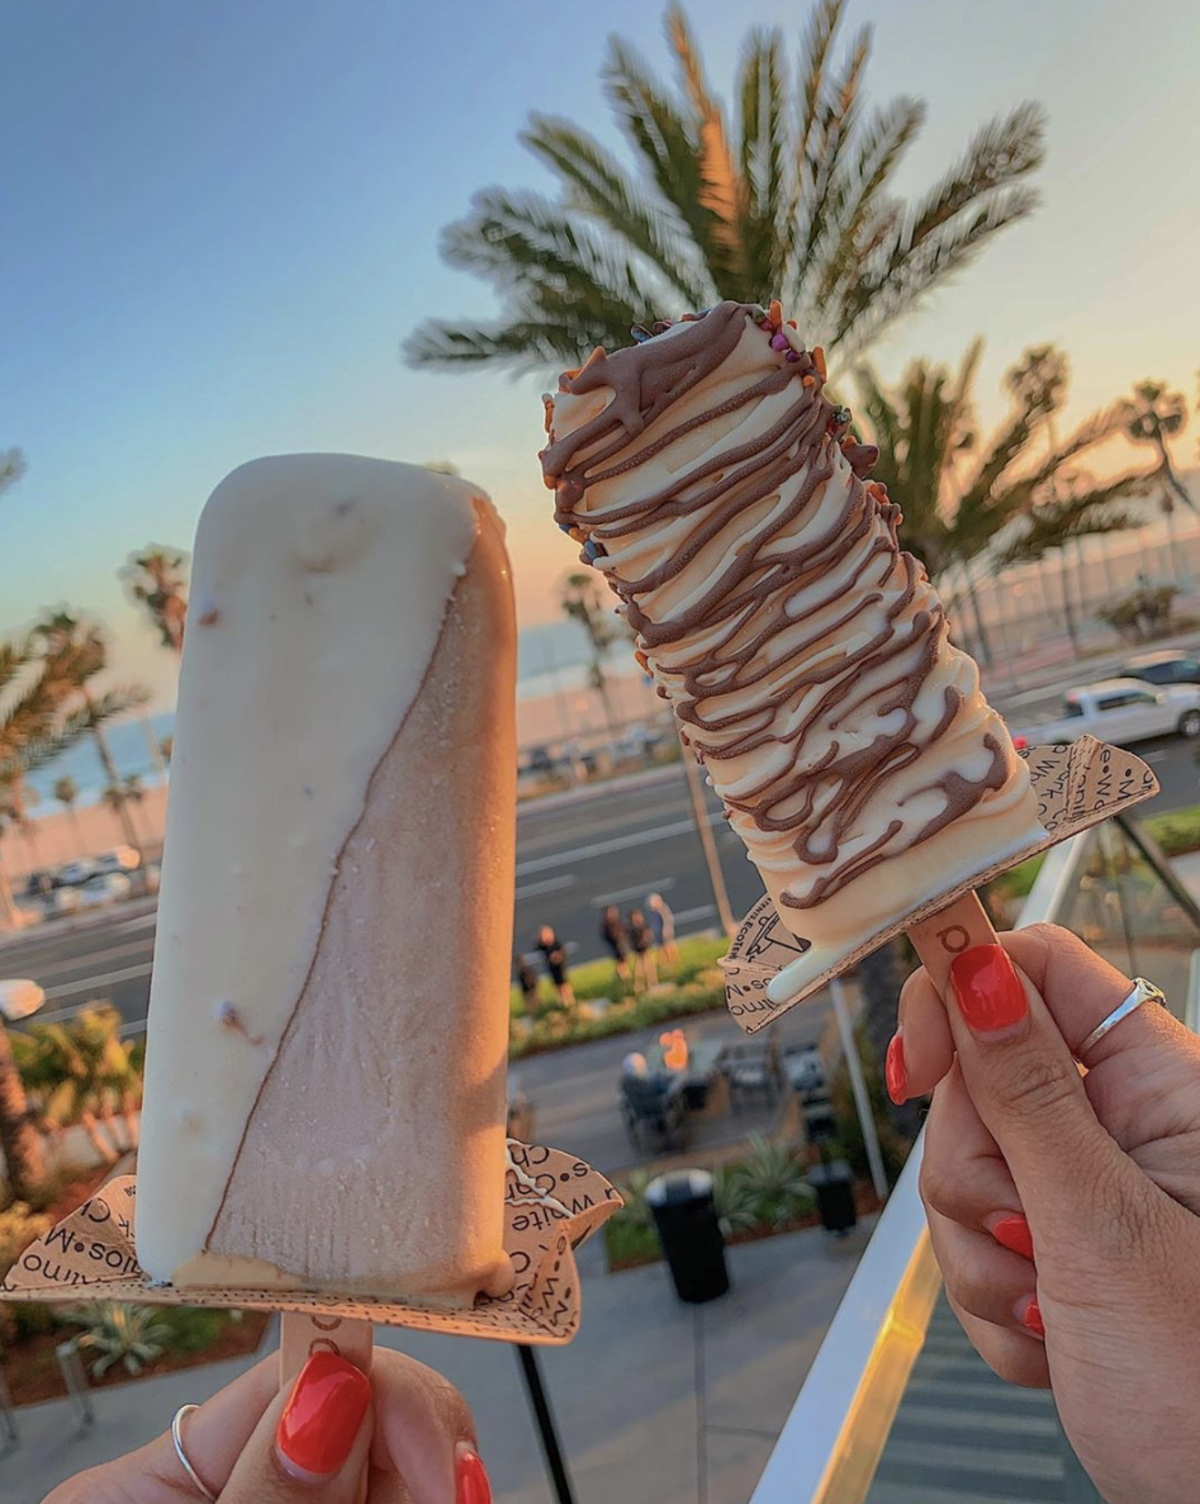 Unique popsicles at Popbar in Huntington Beach